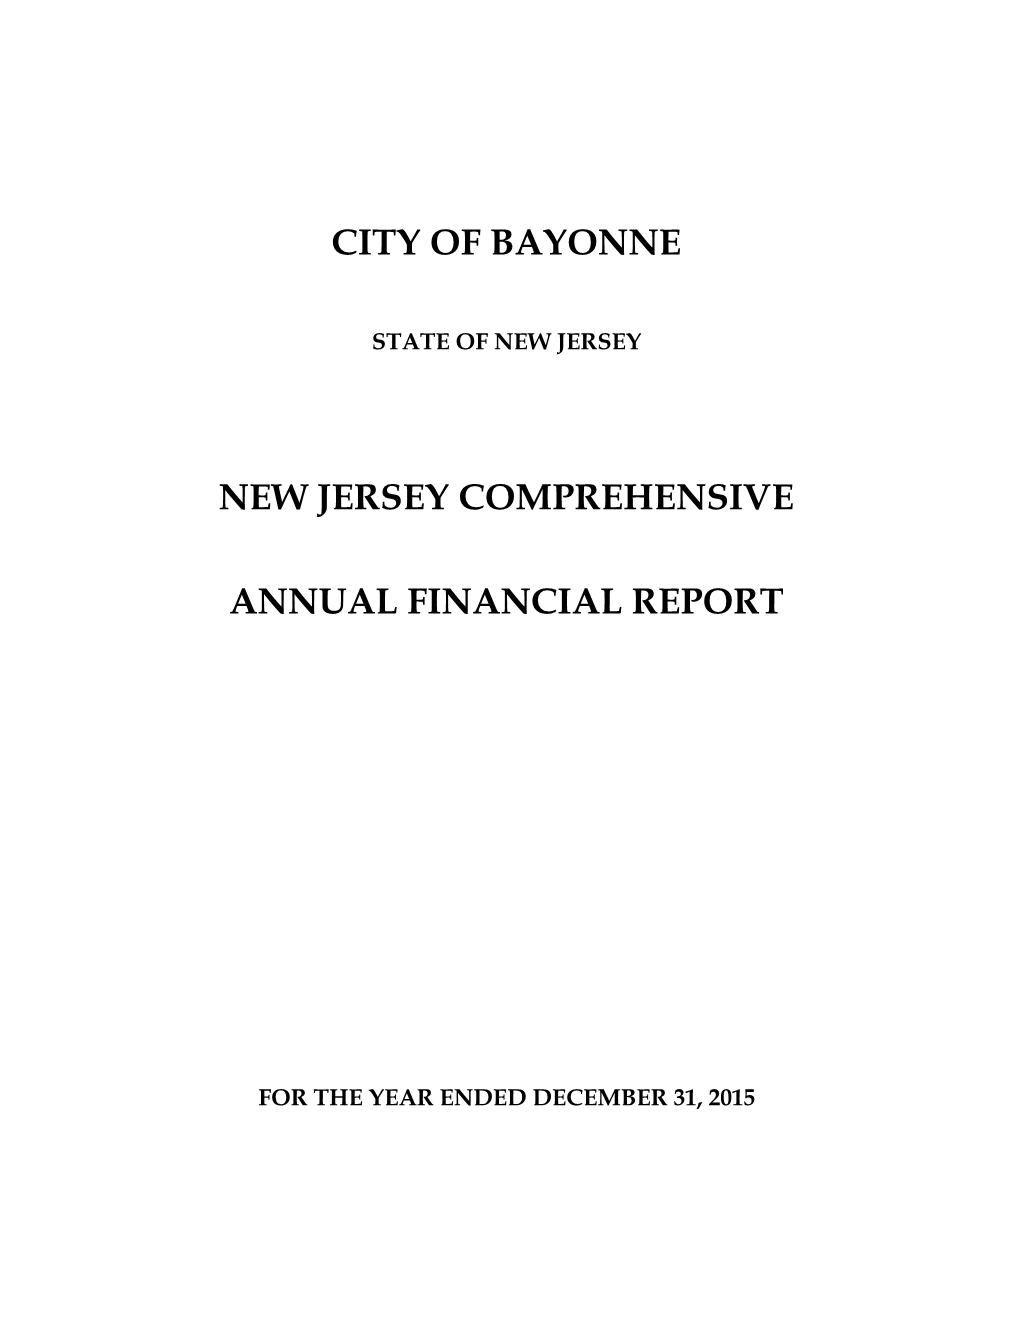 City of Bayonne New Jersey Comprehensive Annual Financial Report